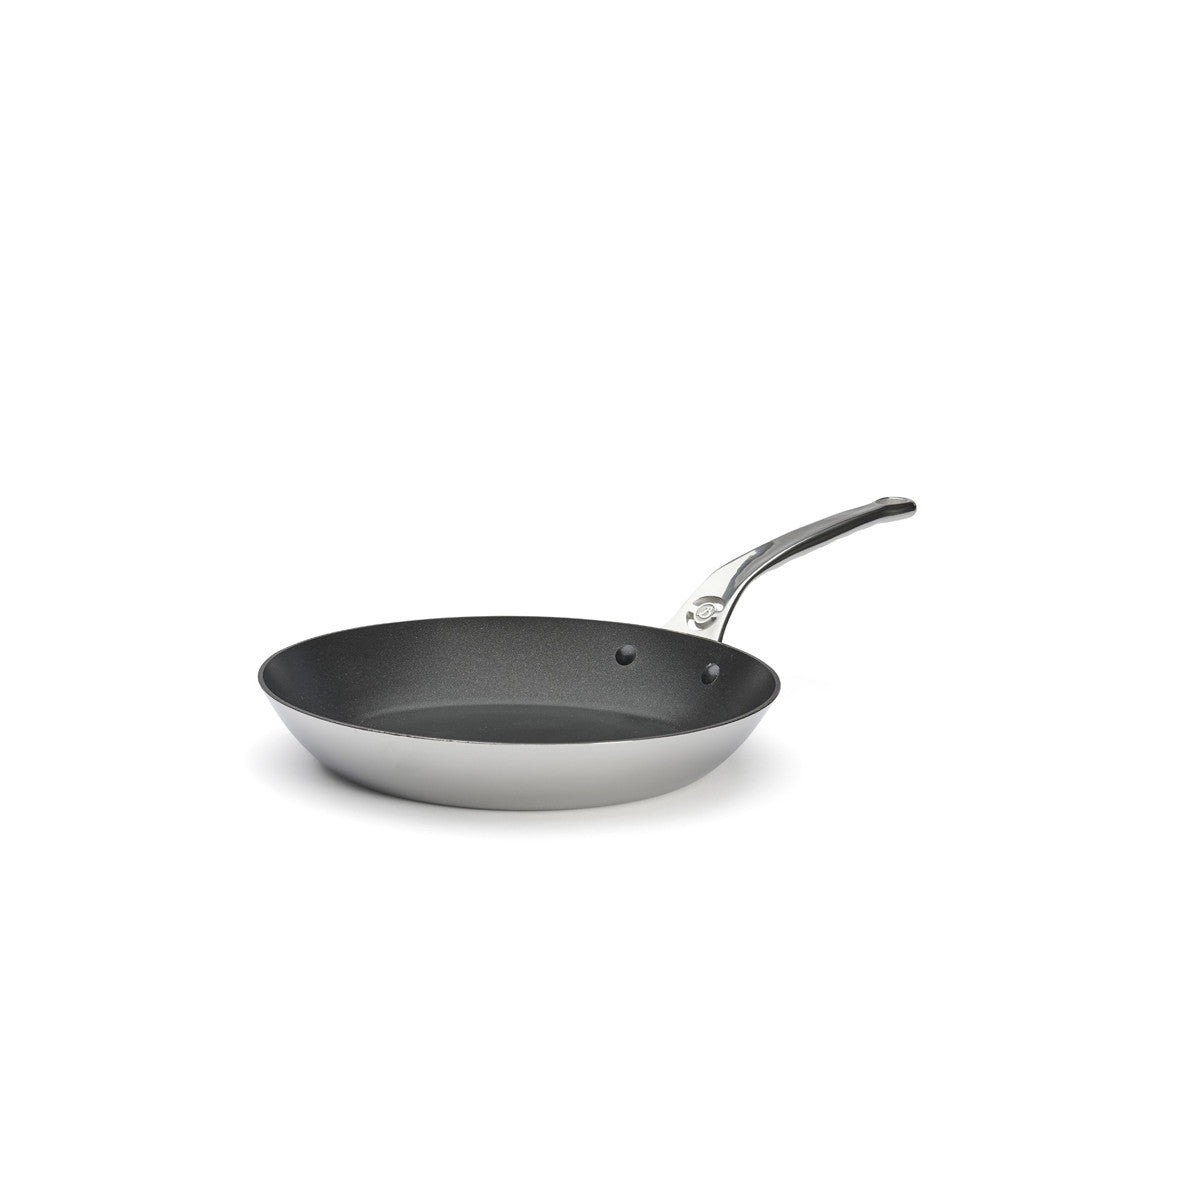 Affinity frying pan, non-stick